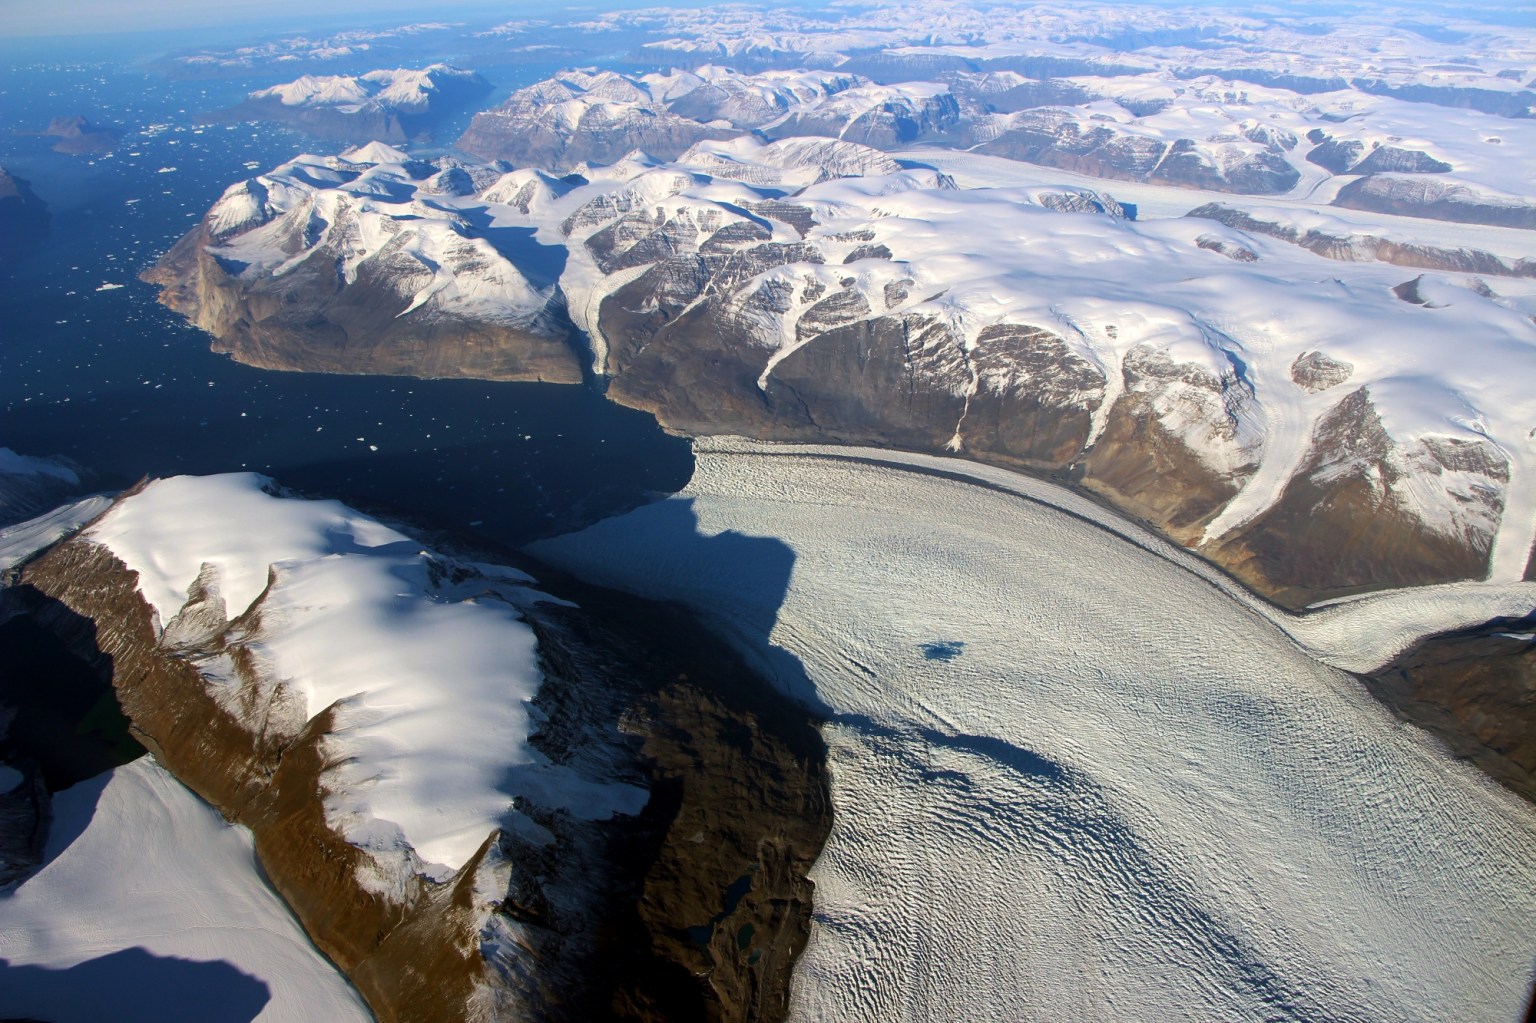 An aerial photo of a glacier in Greenland, looking like a wide, frozen gray-white river between two snow-mounded rock formations. The glacier has many small grooves and striations. The rocks on either side are tall and rounded, with smooth snow covering them like icing on buns. The rocky landscape extends out to the blue horizon, with deep blue water carrying small white ice floes in the left side of the image.